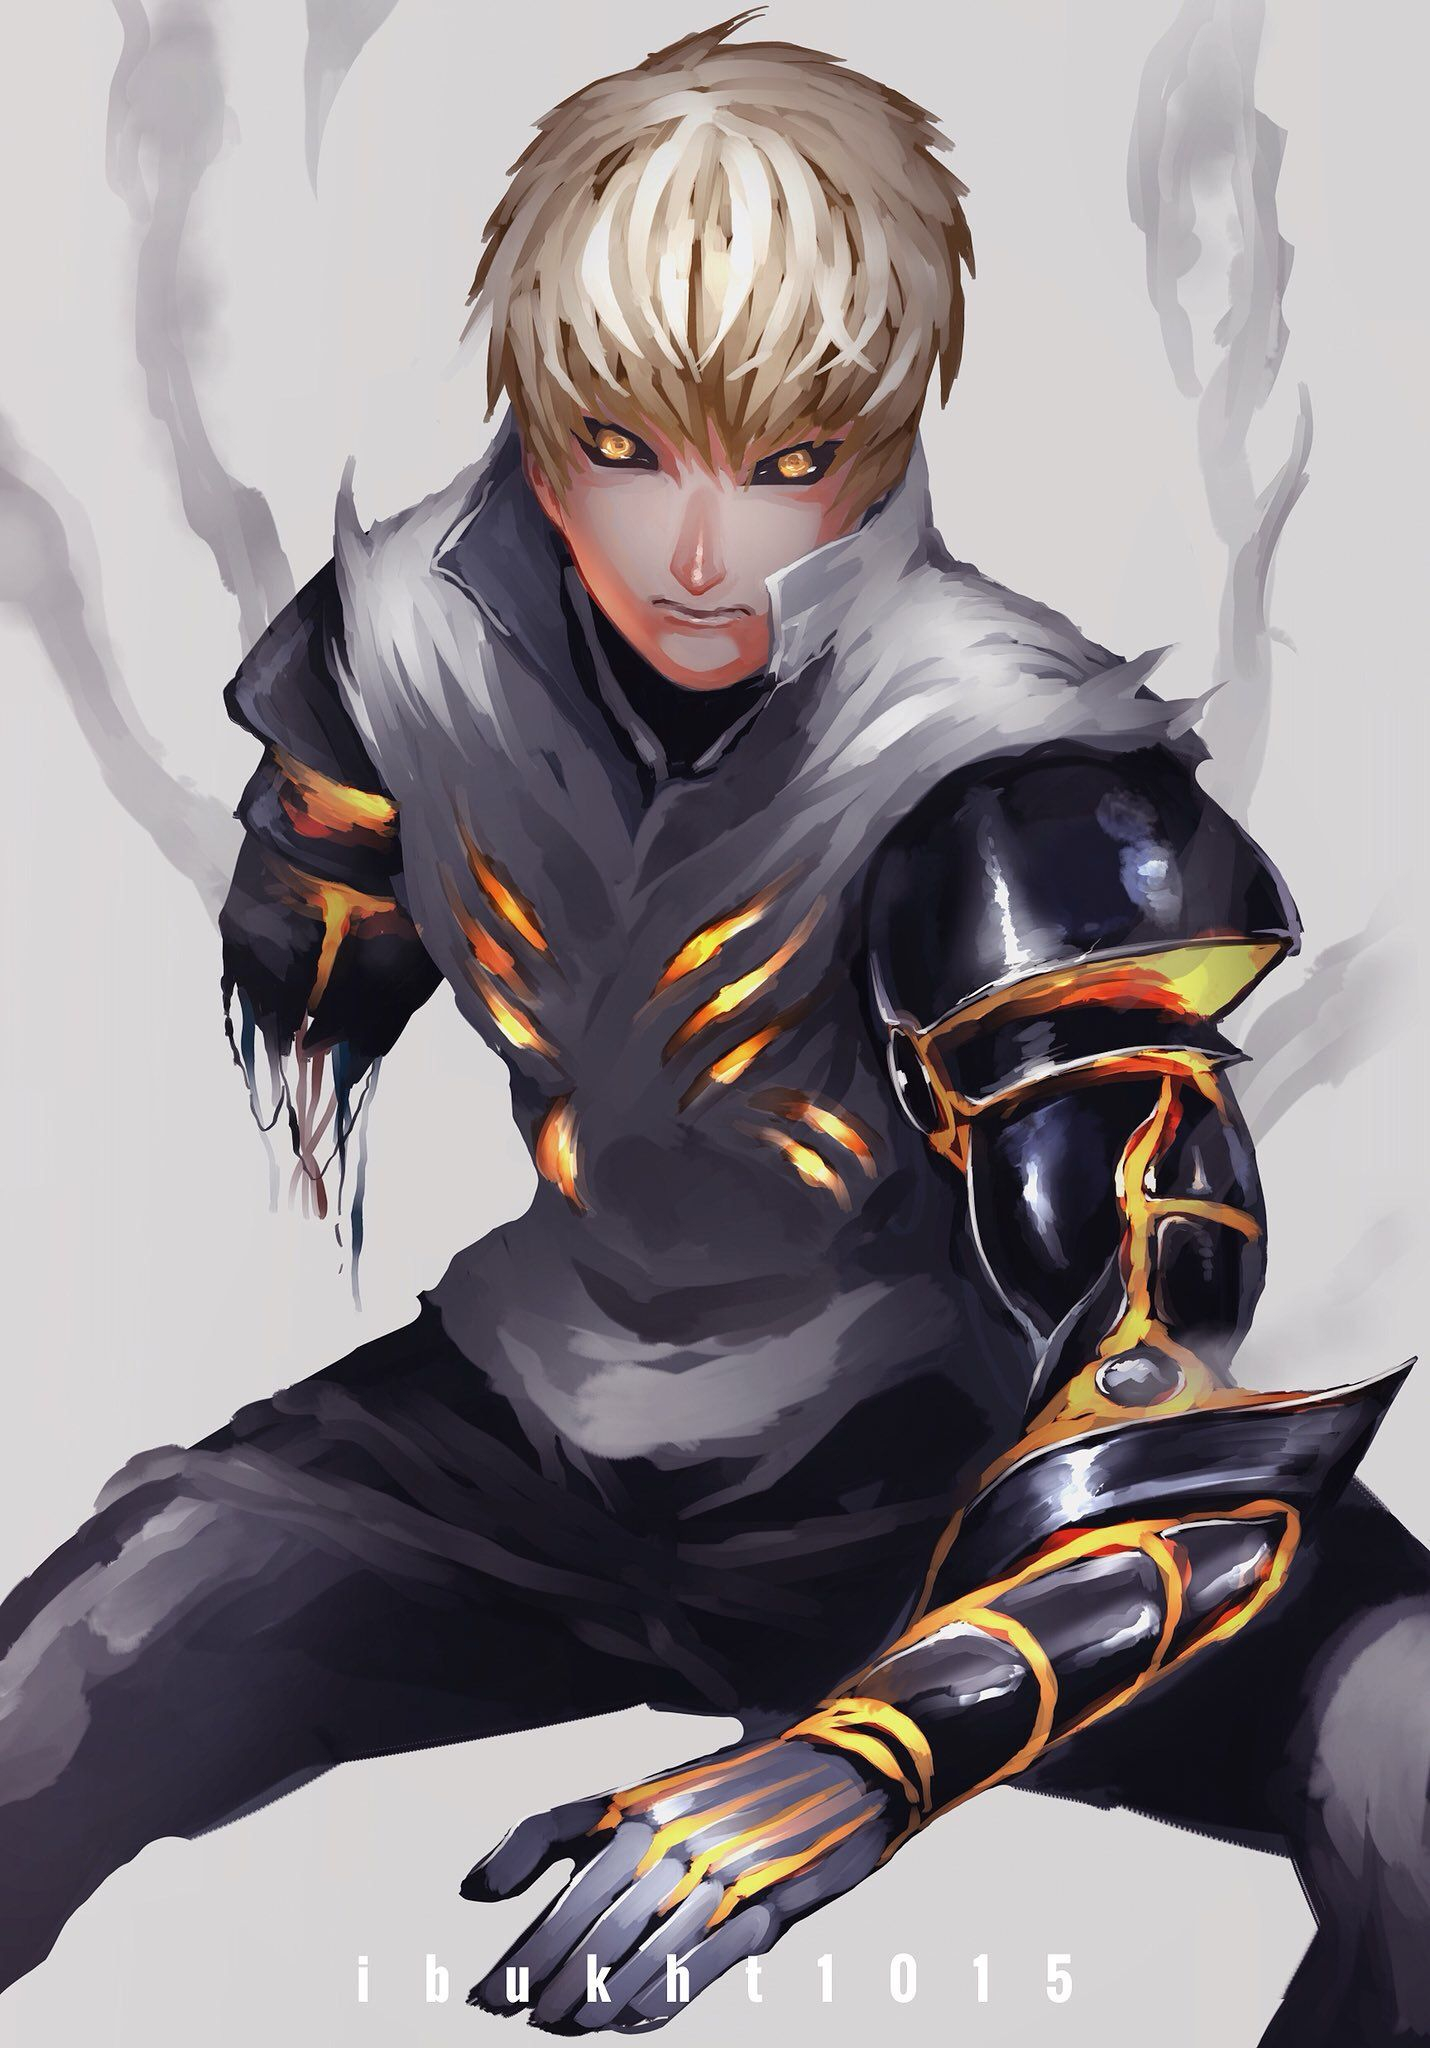 1430x2048 One Punch Man Genos | One punch man anime, One punch man, One punch